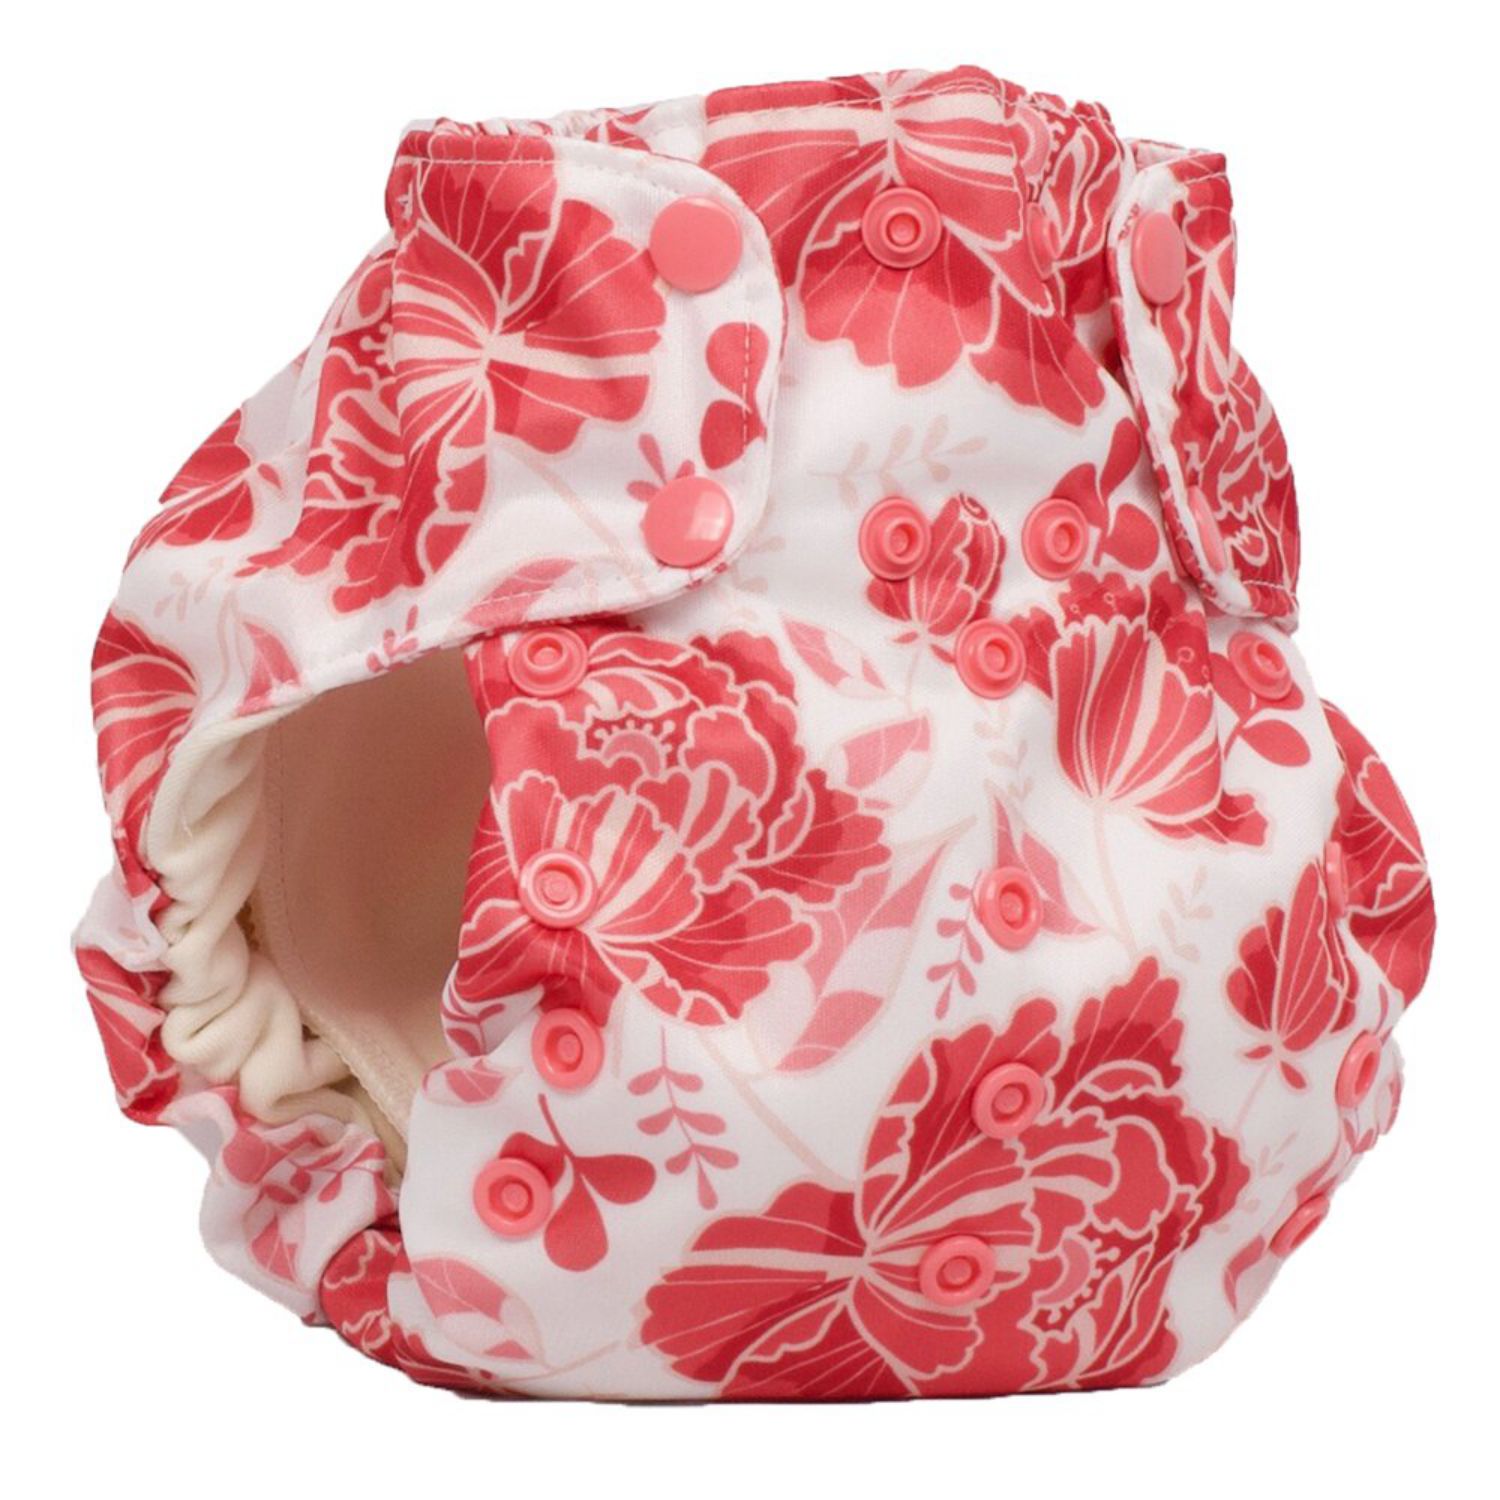 Smart Bottoms 3.1 One Size All-in-One nappy Pattern: Stella